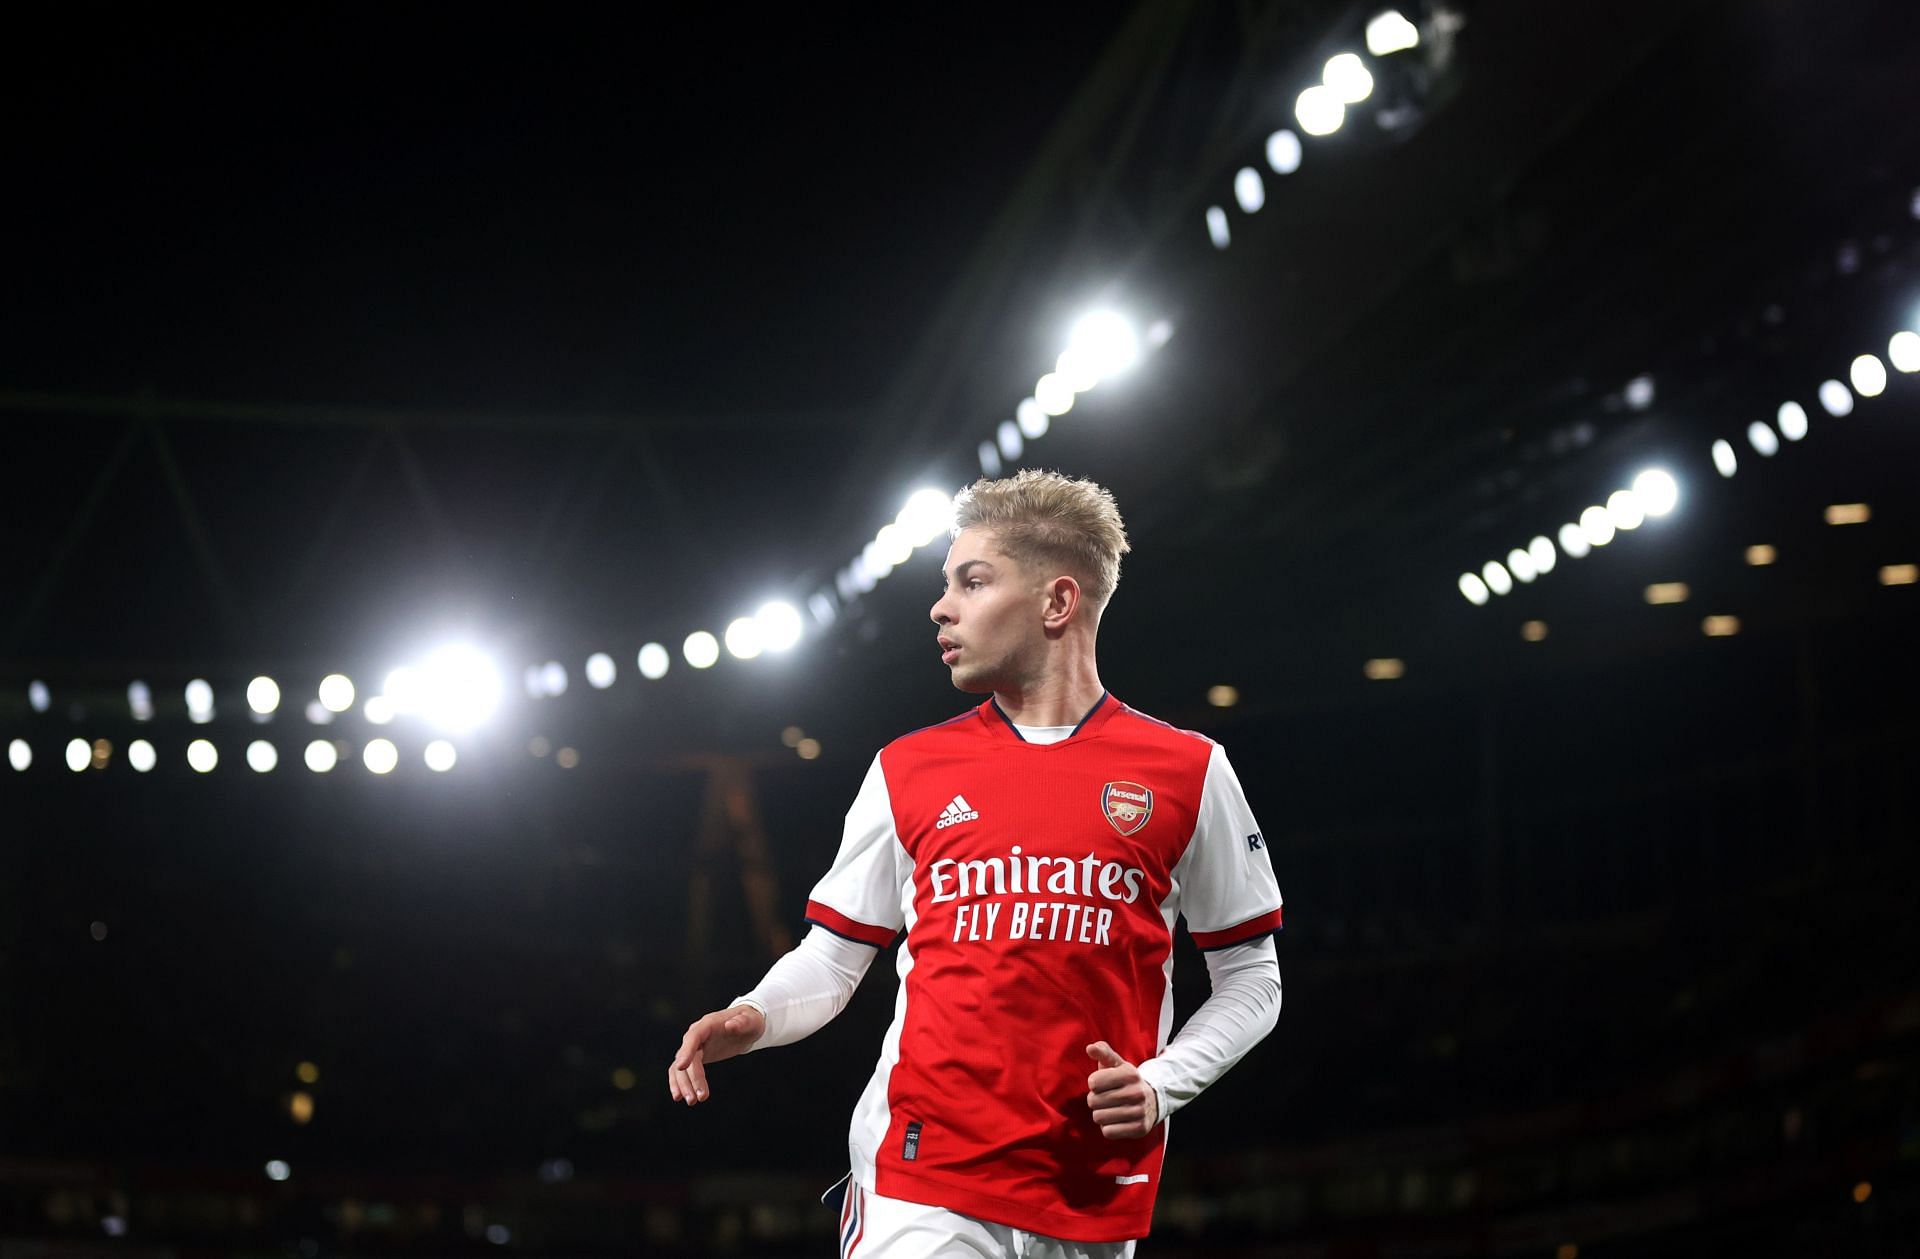 Will Emile Smith Rowe make his dream come true with an appearance for England?